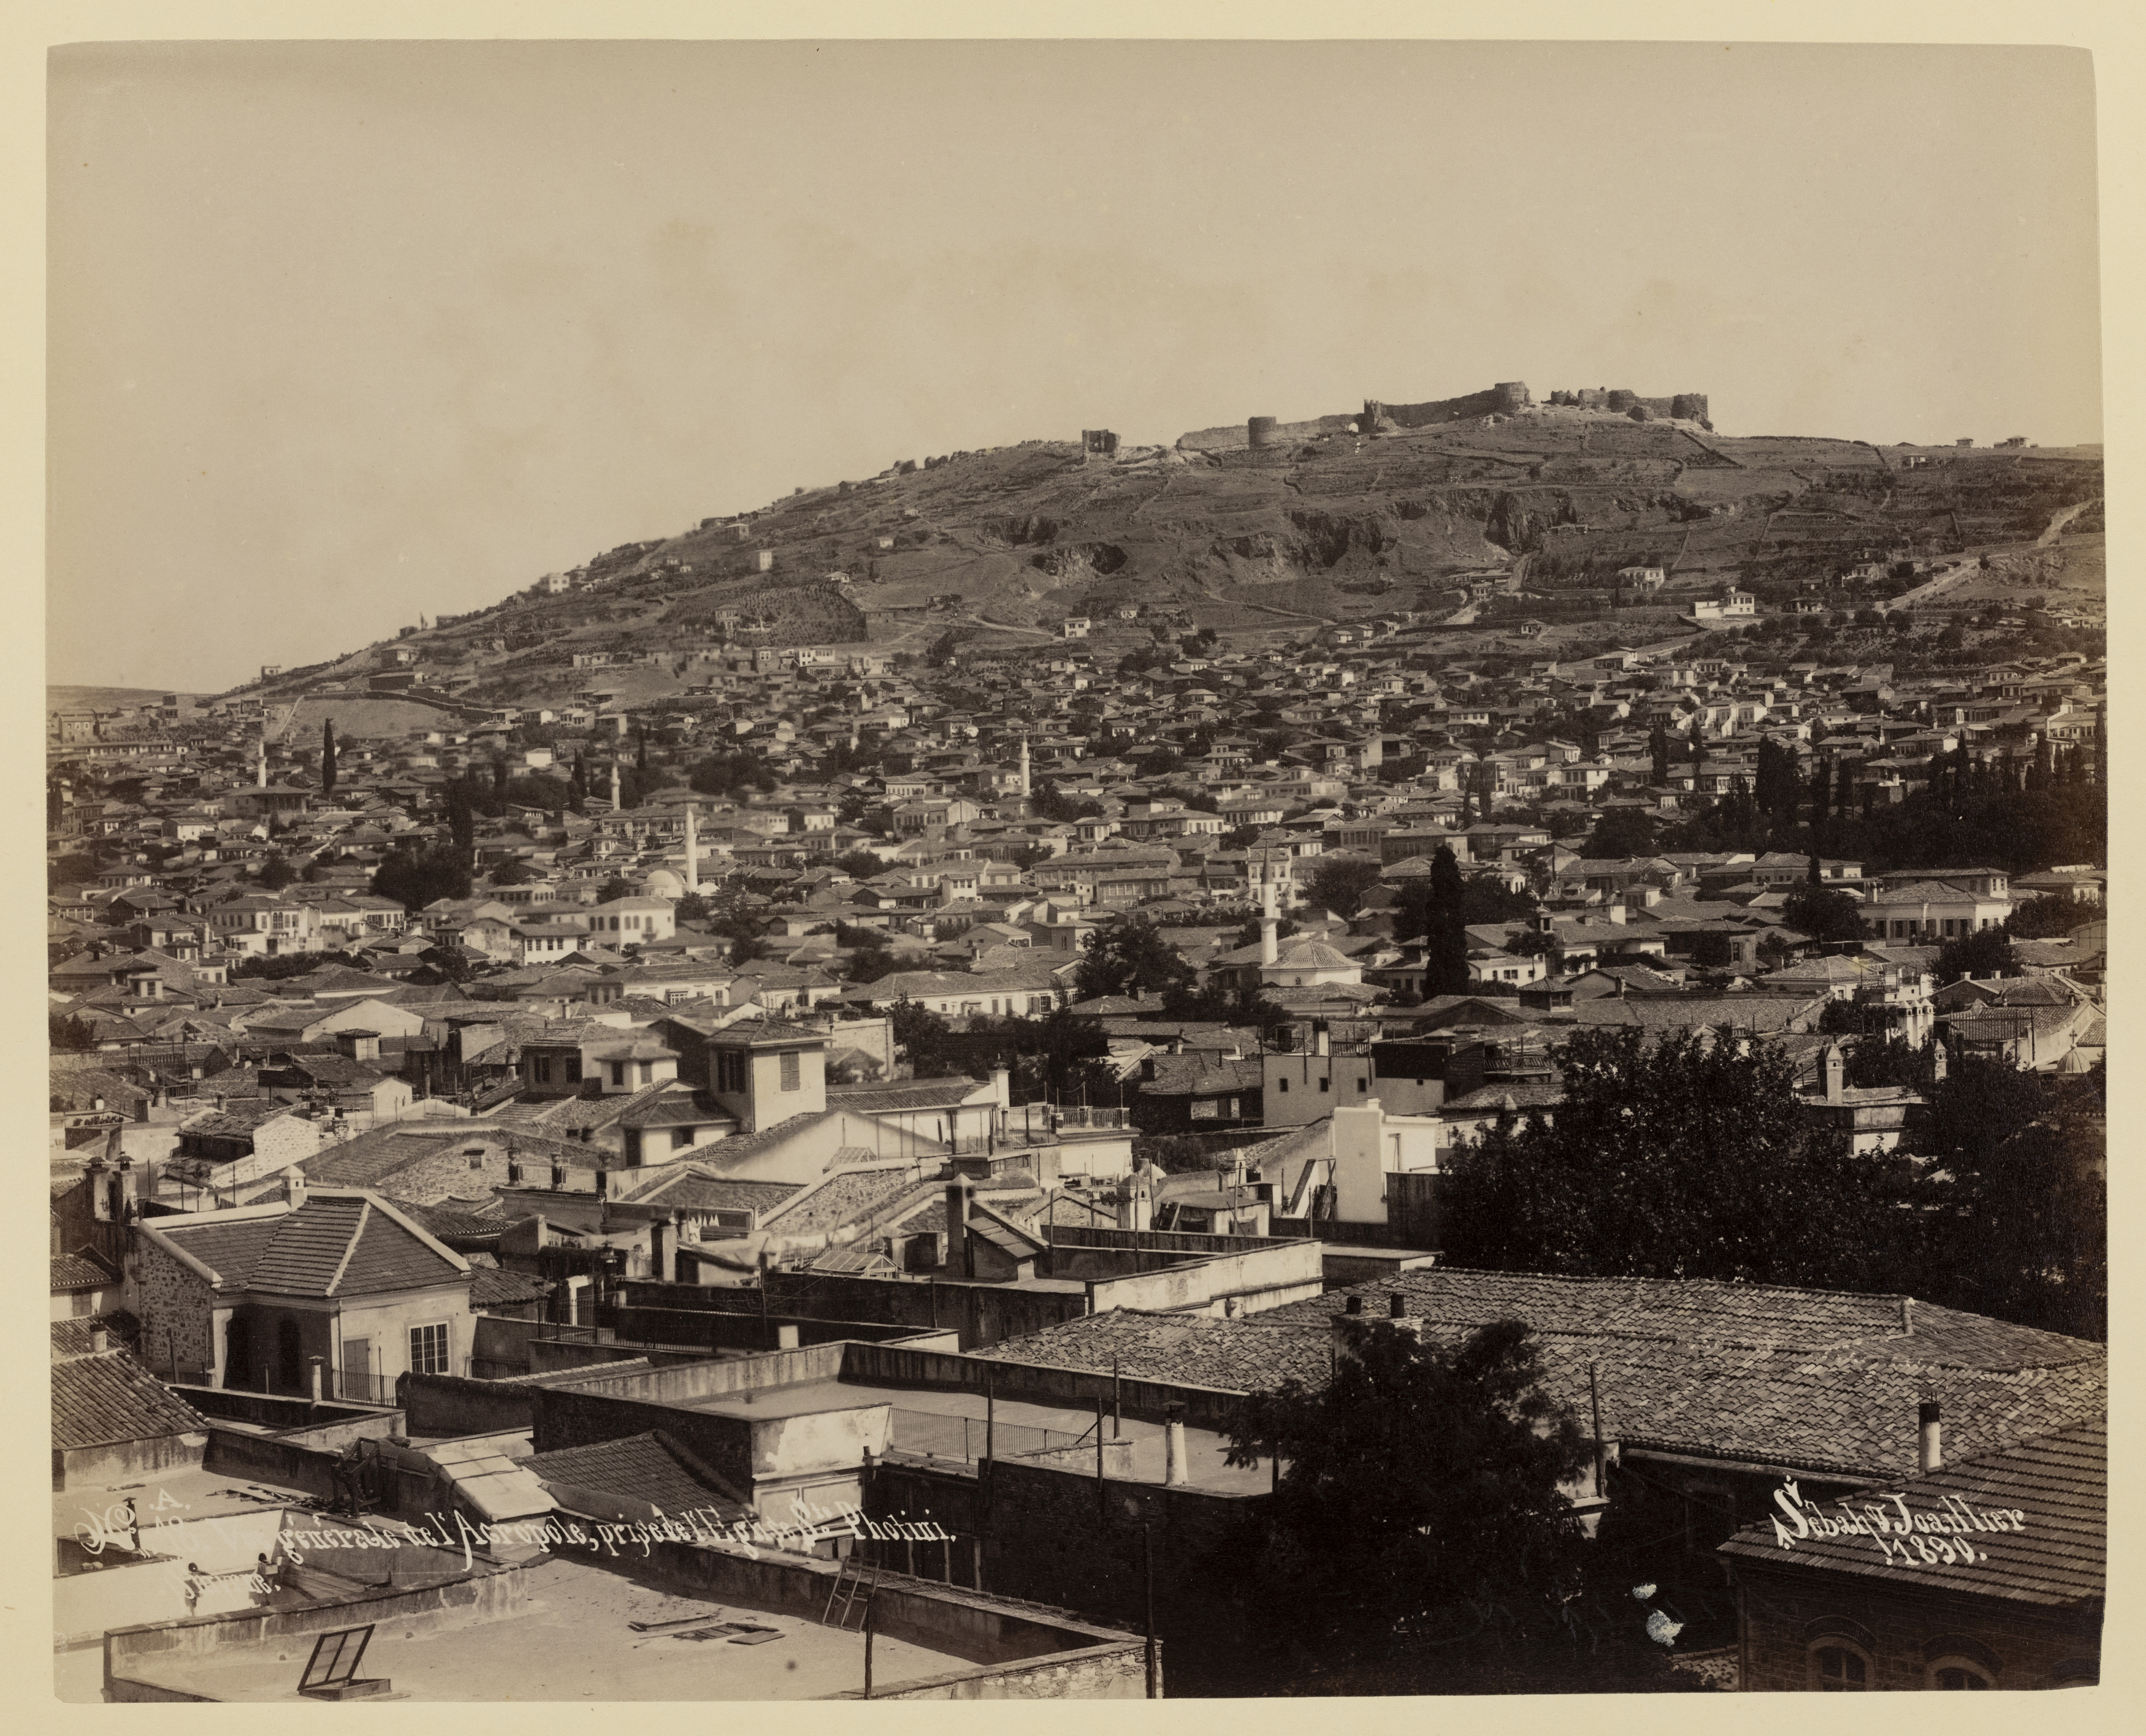 An album of silver prints of views of the Middle East, Late 19th century/first half 20th century... - Image 4 of 8